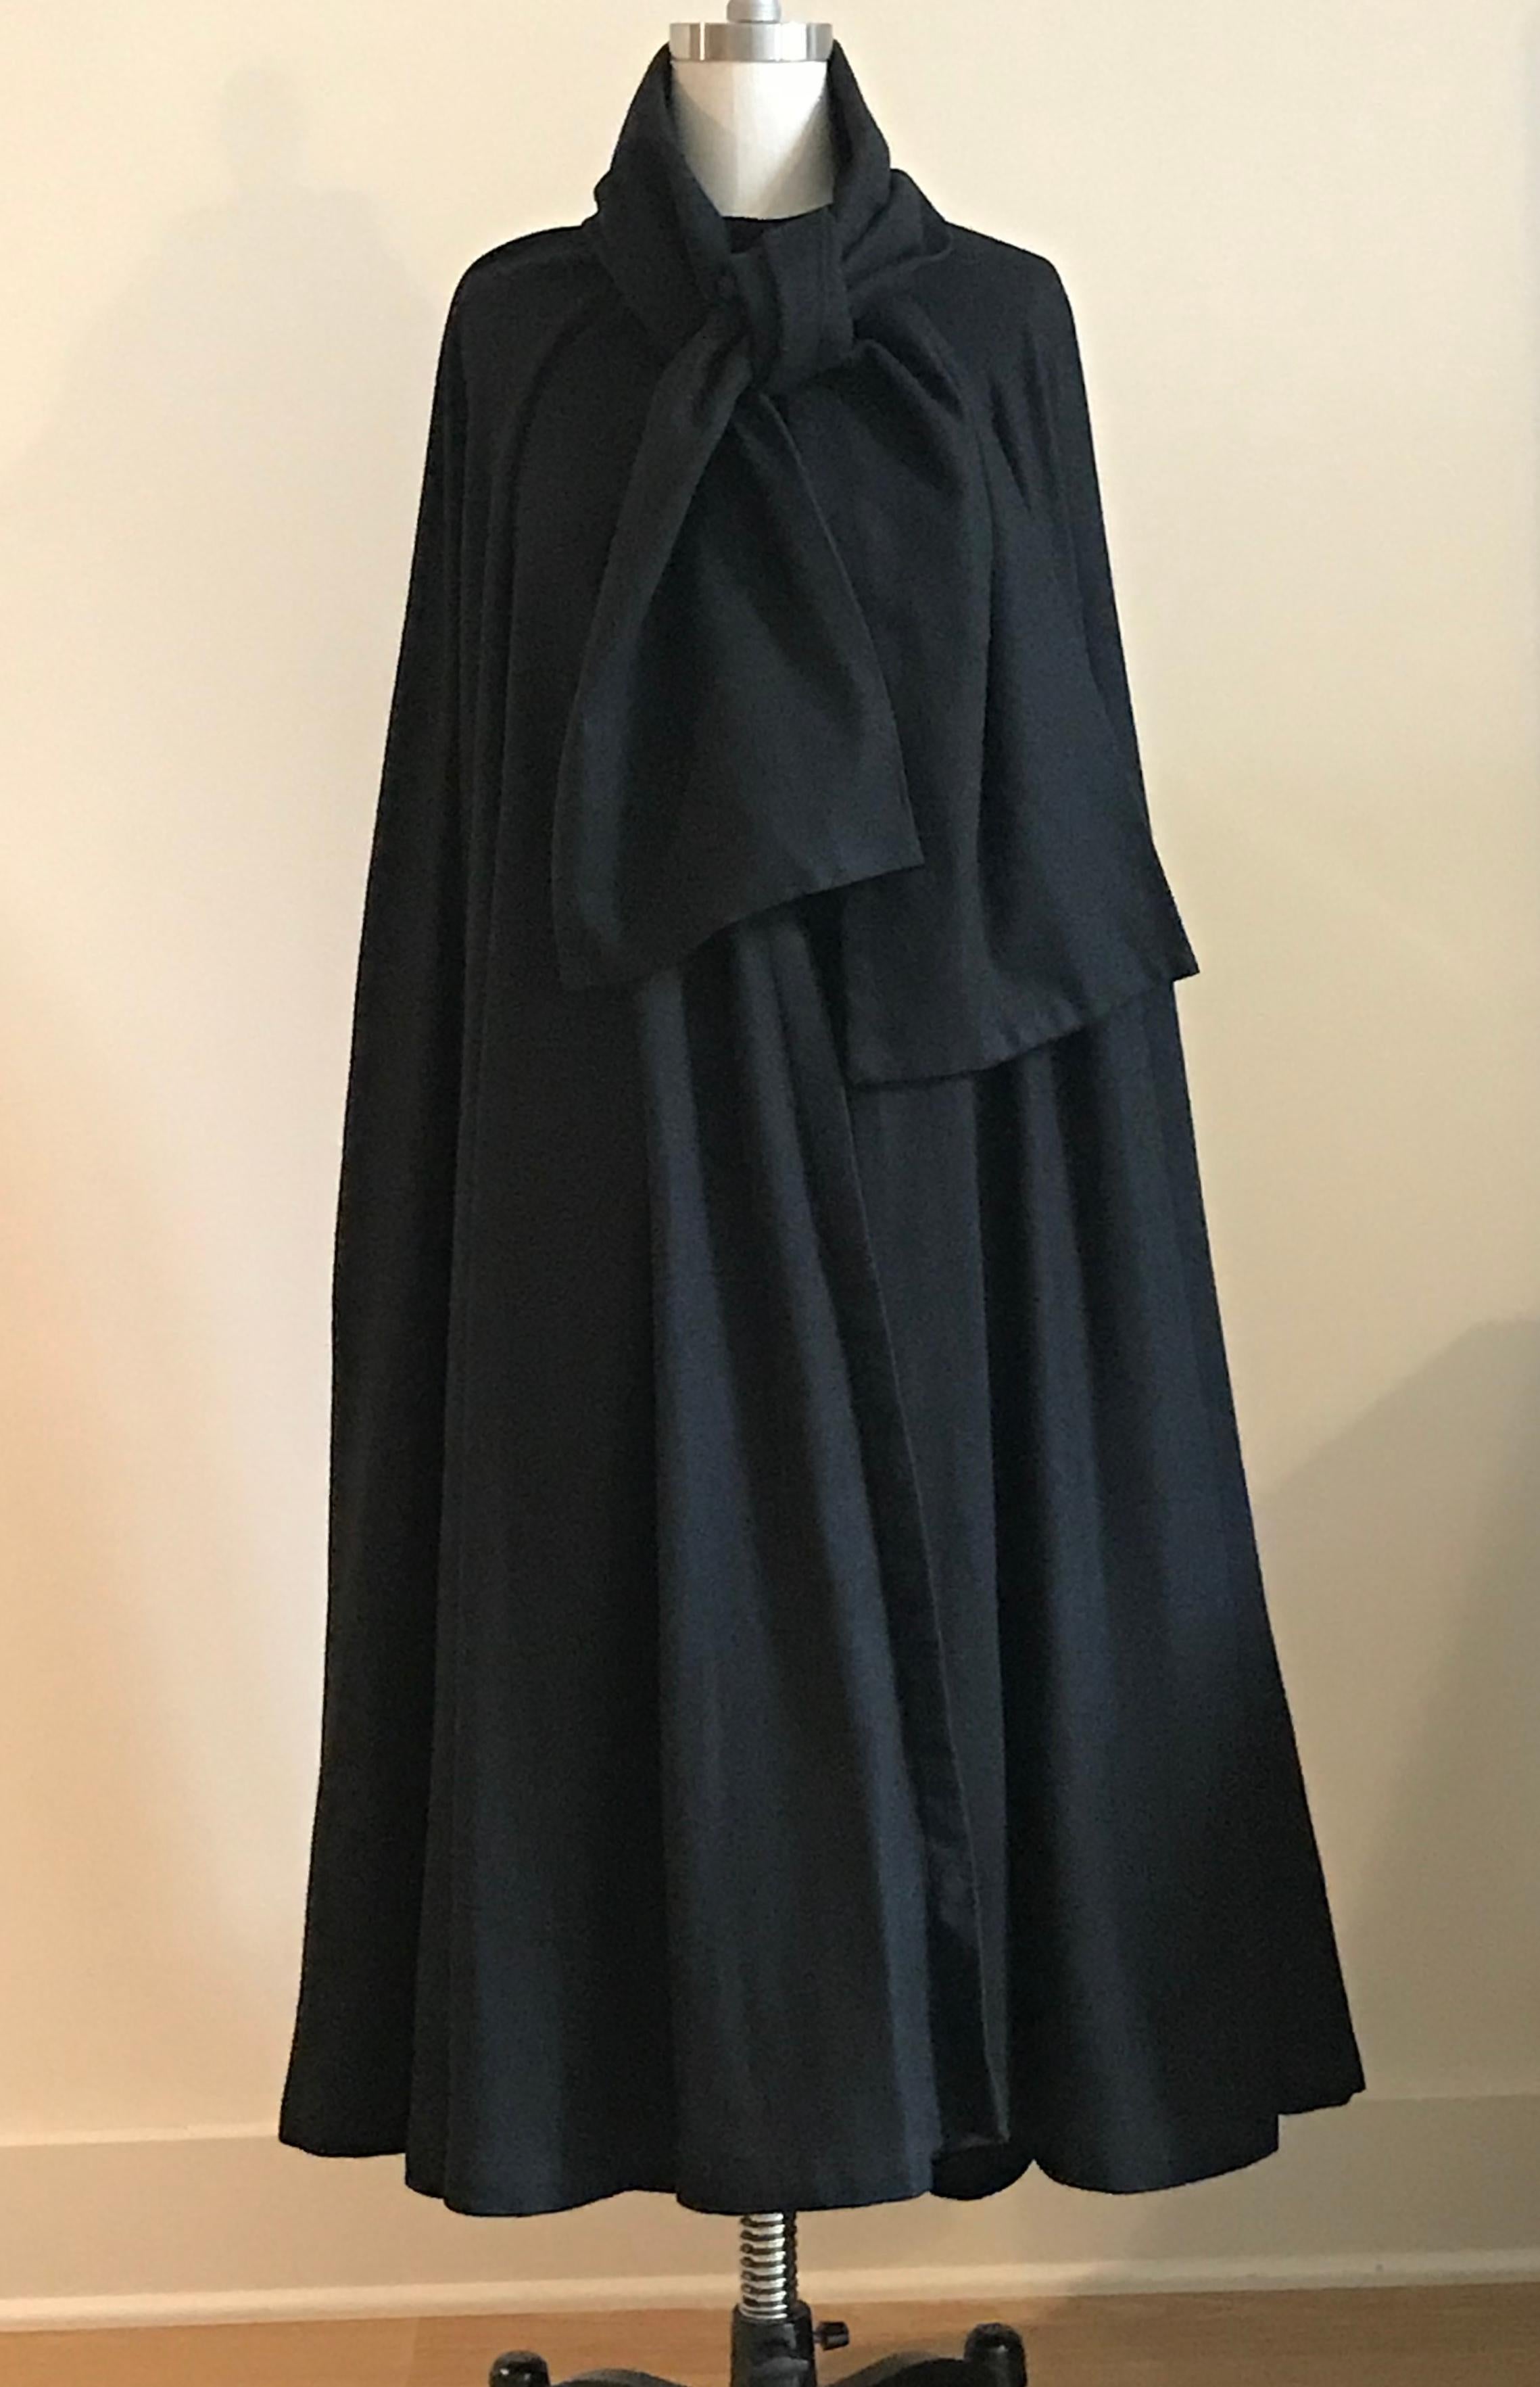 Geoffrey Beene vintage 1970s black cape with a faint herring bone weave. Closes at neck with a snap and hook. Wide scarf detail at collar Can be tied and let hang, or tucked in around neck to create a more sculptural look. Hits between knee and